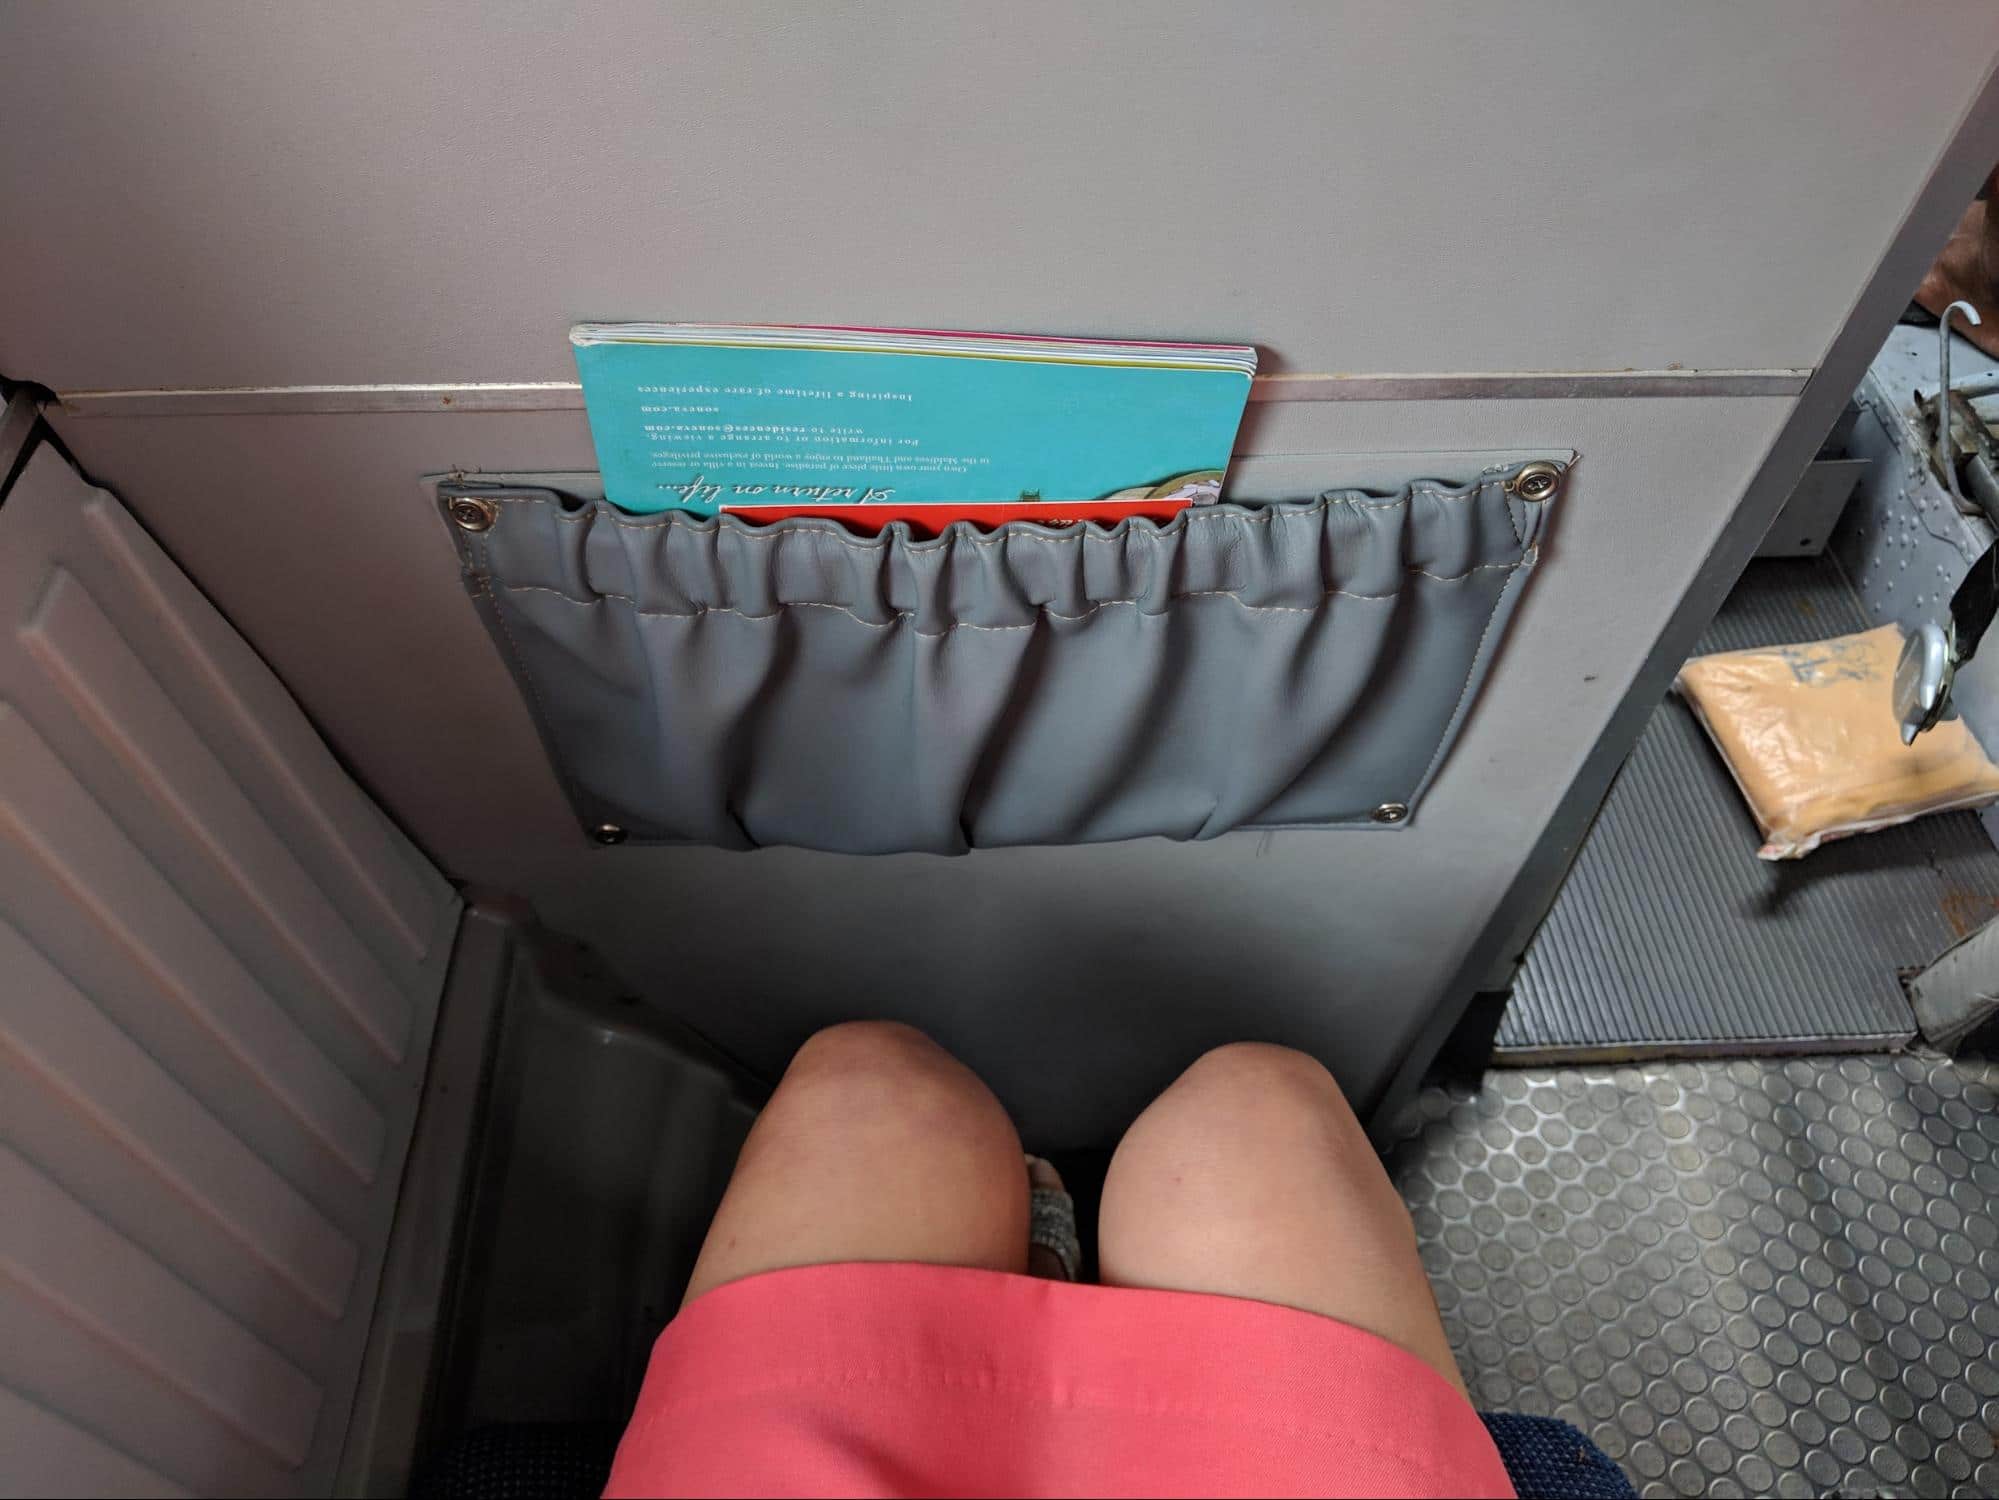 Space between my knees and the front wall to the pilot